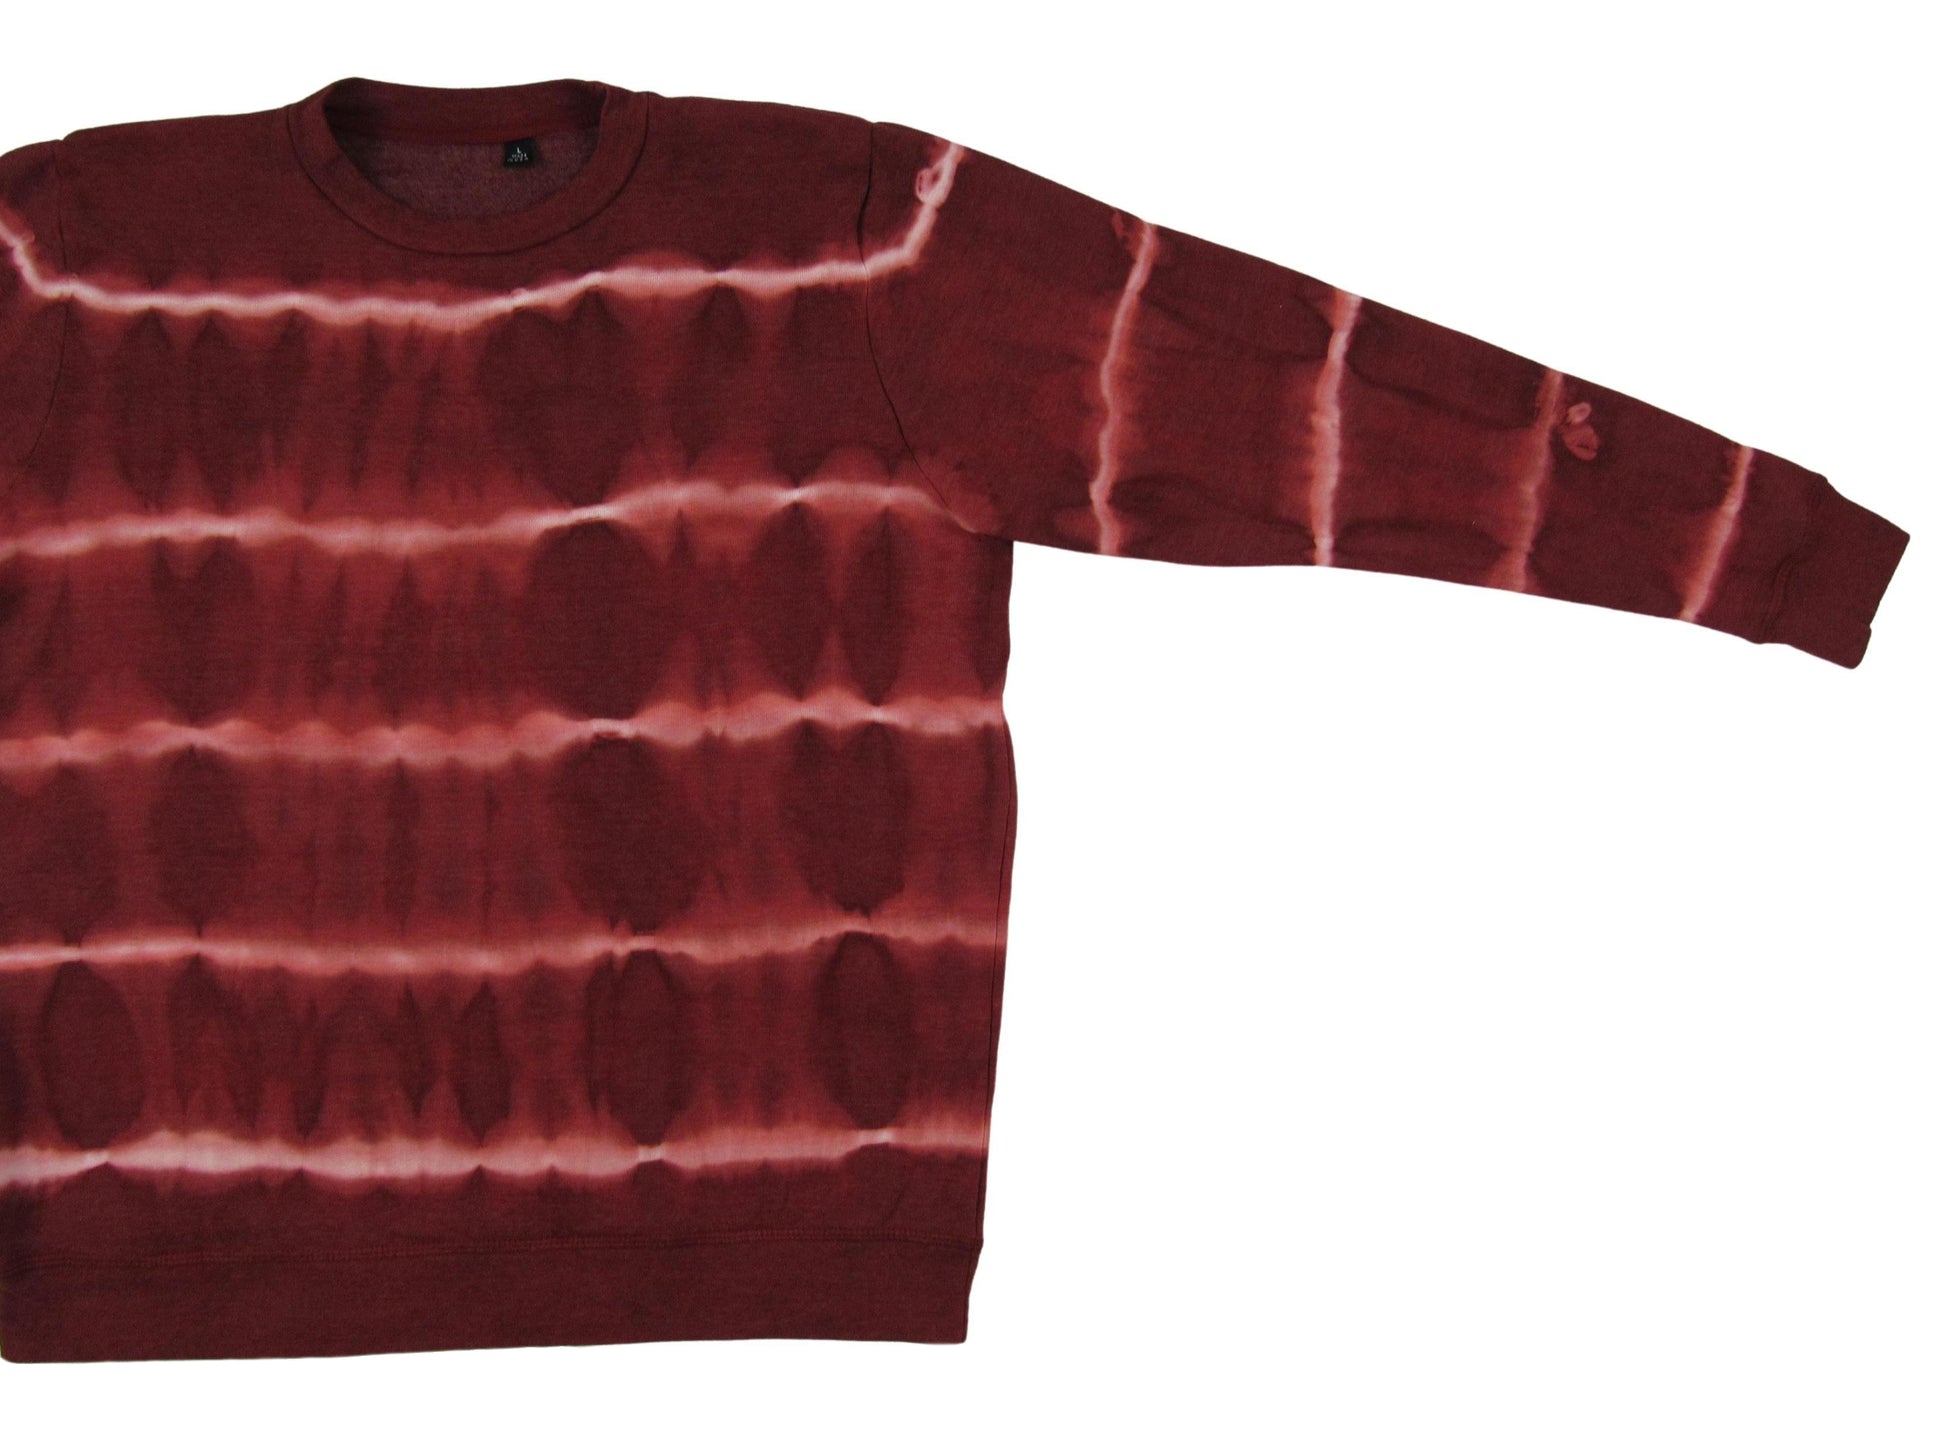 Horizontal Tie Dye Long sleeve crewneck in burgandy and natural by Old El Paso Shirtworks Made in USA